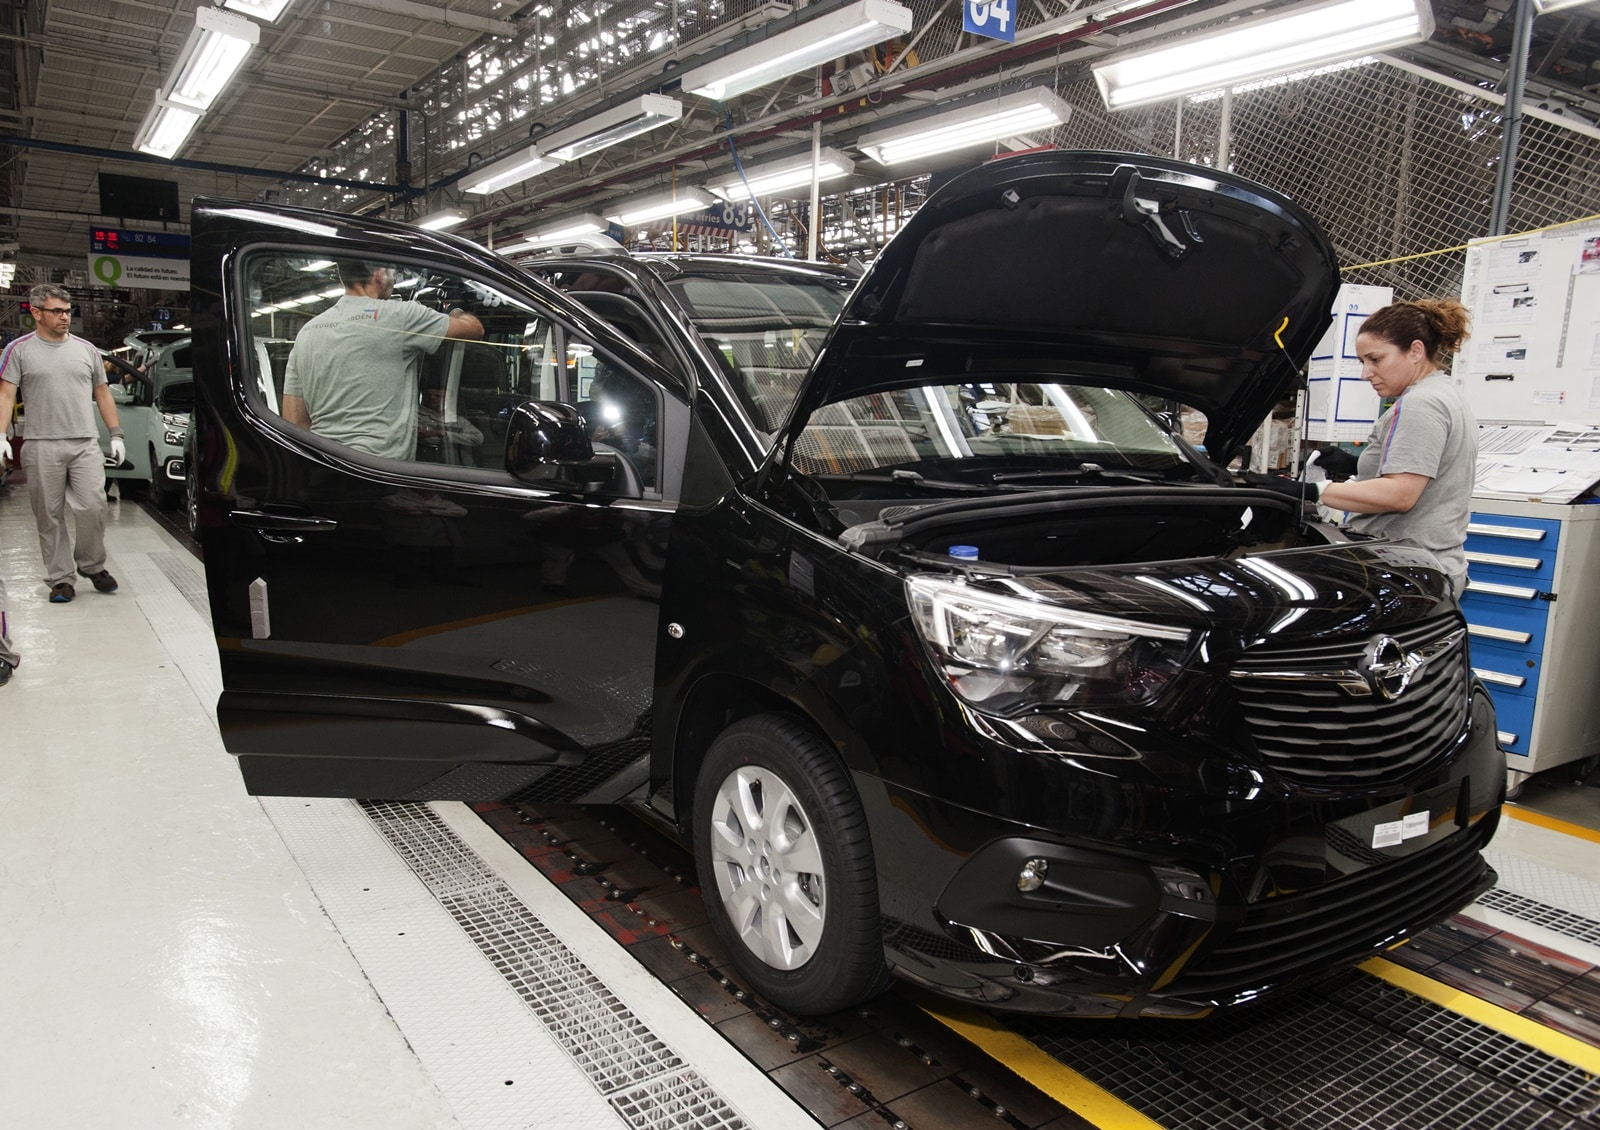 Vehicle production in Spain also continues to decline